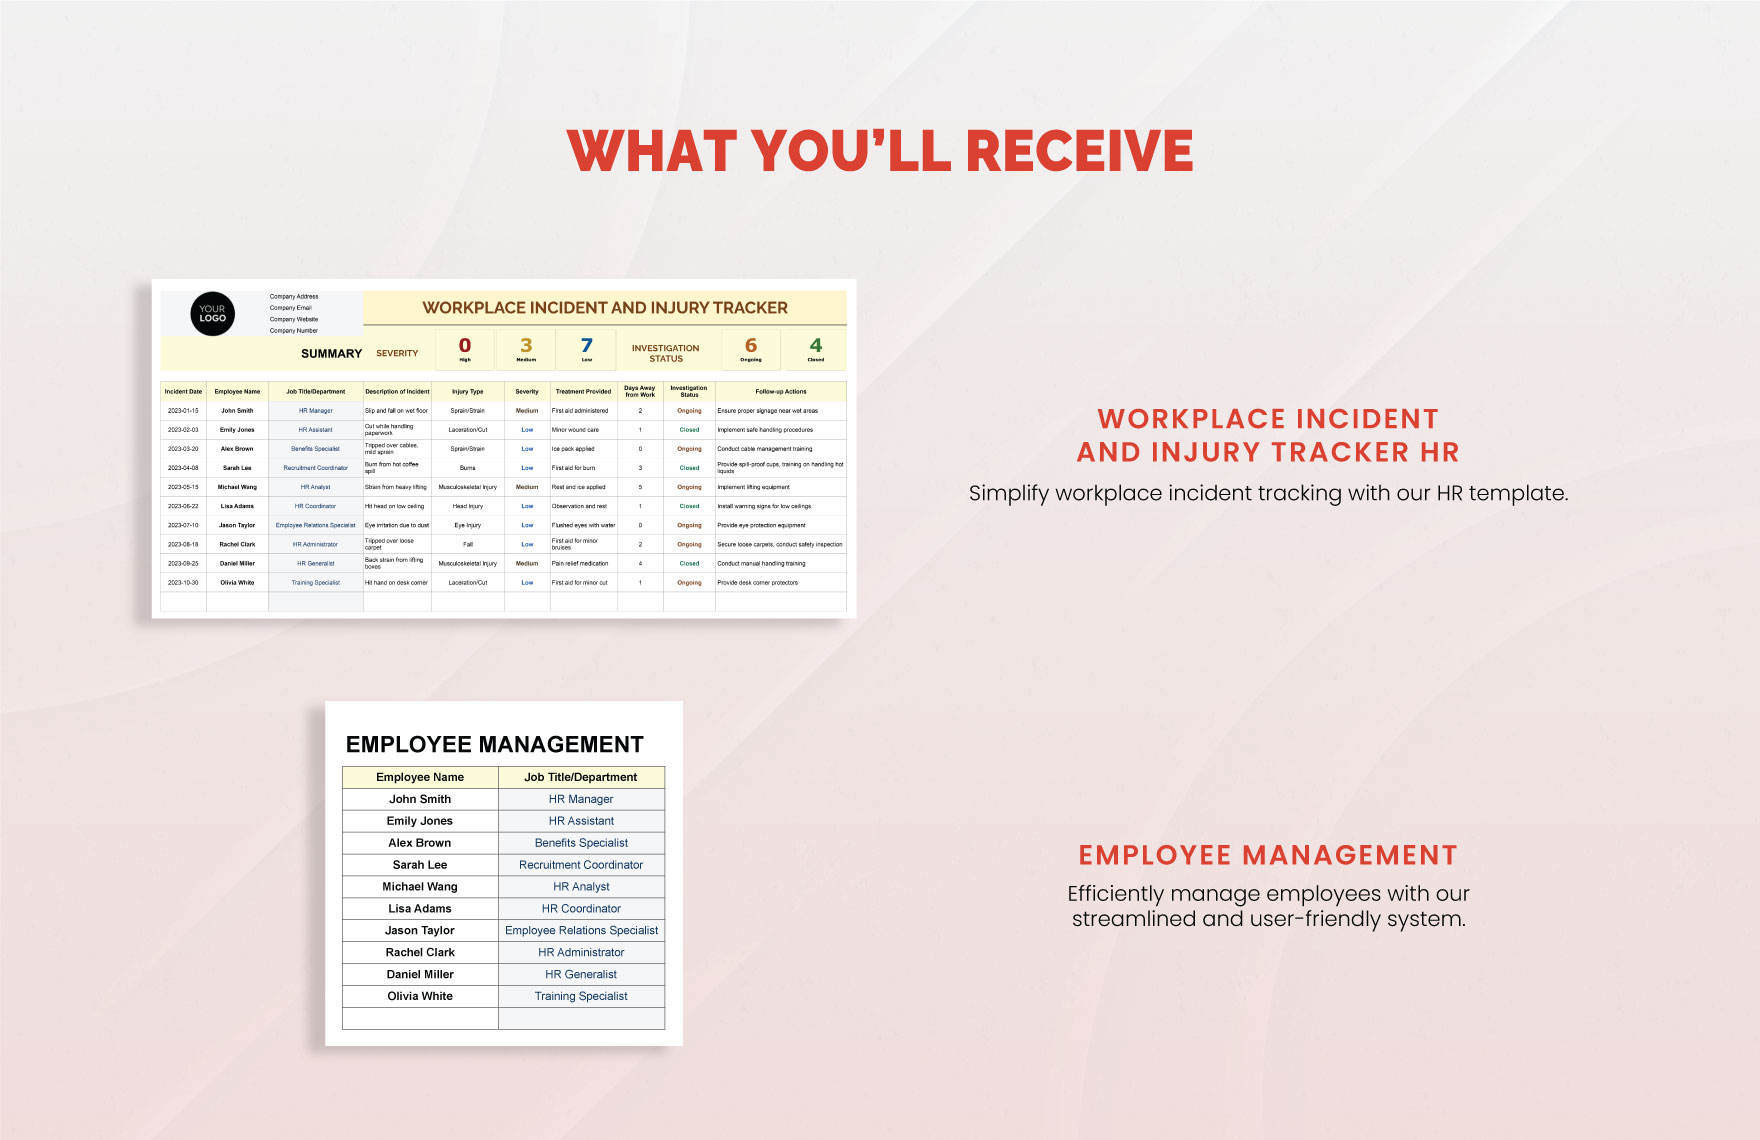 Workplace Incident and Injury Tracker HR Template